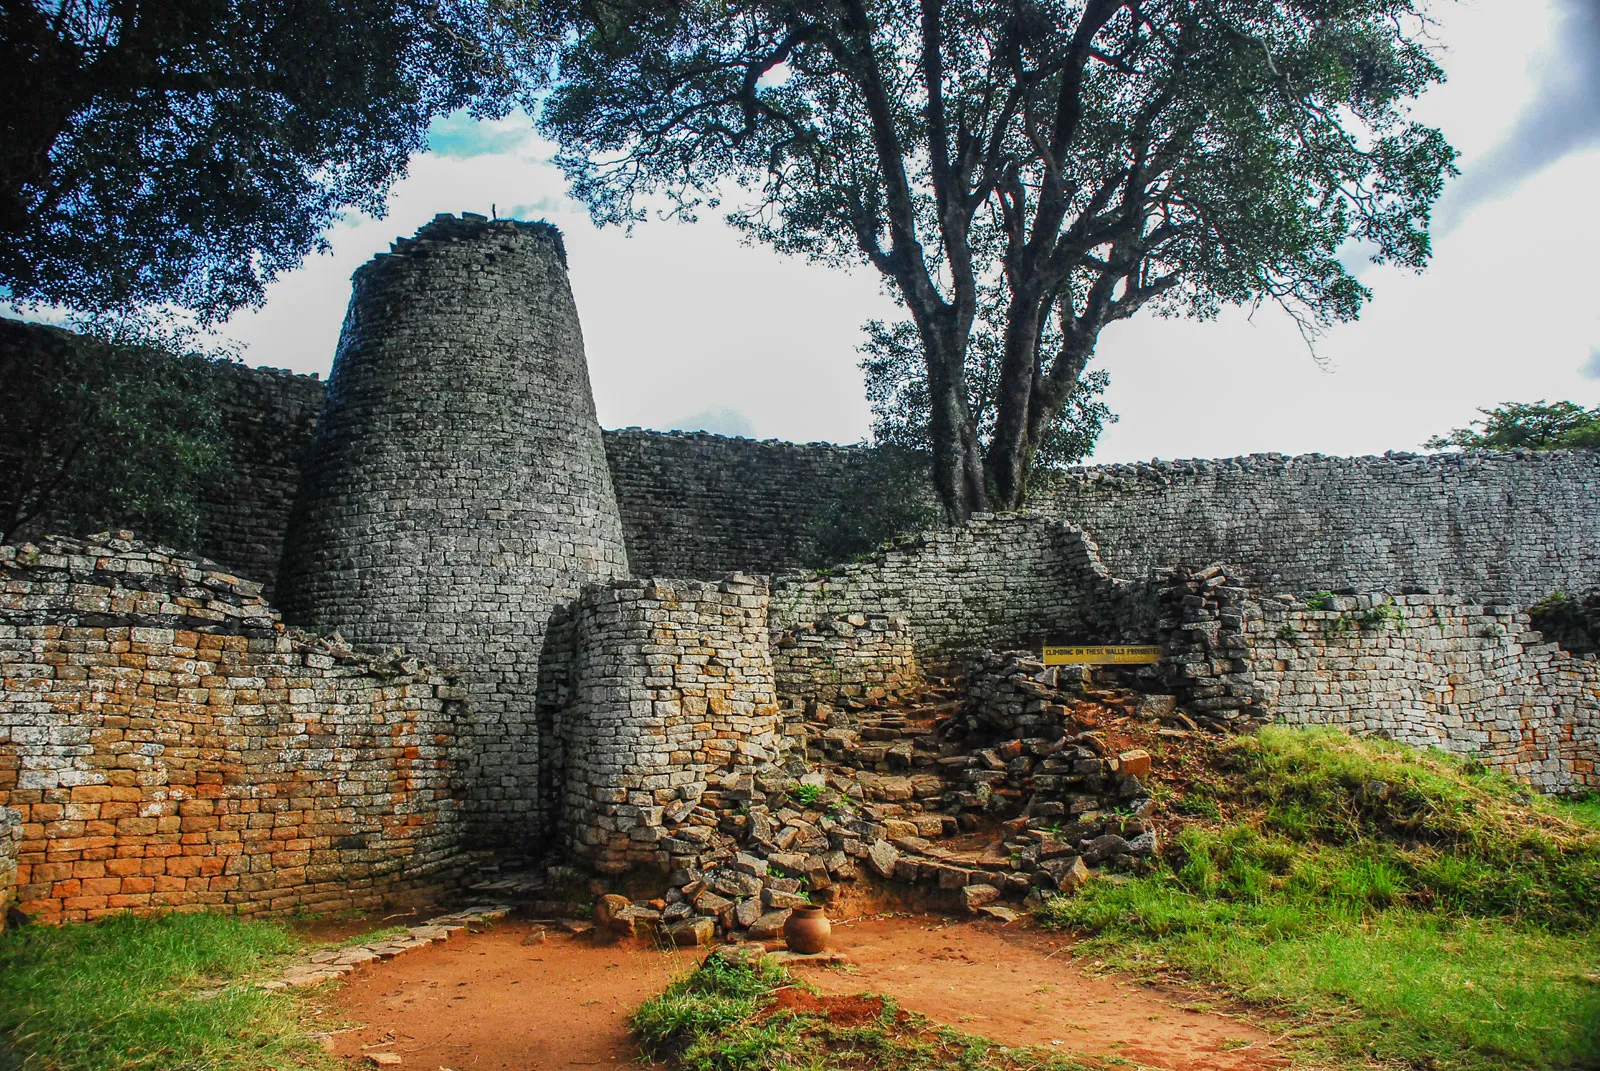 Conical Tower of Great Zimbabwe